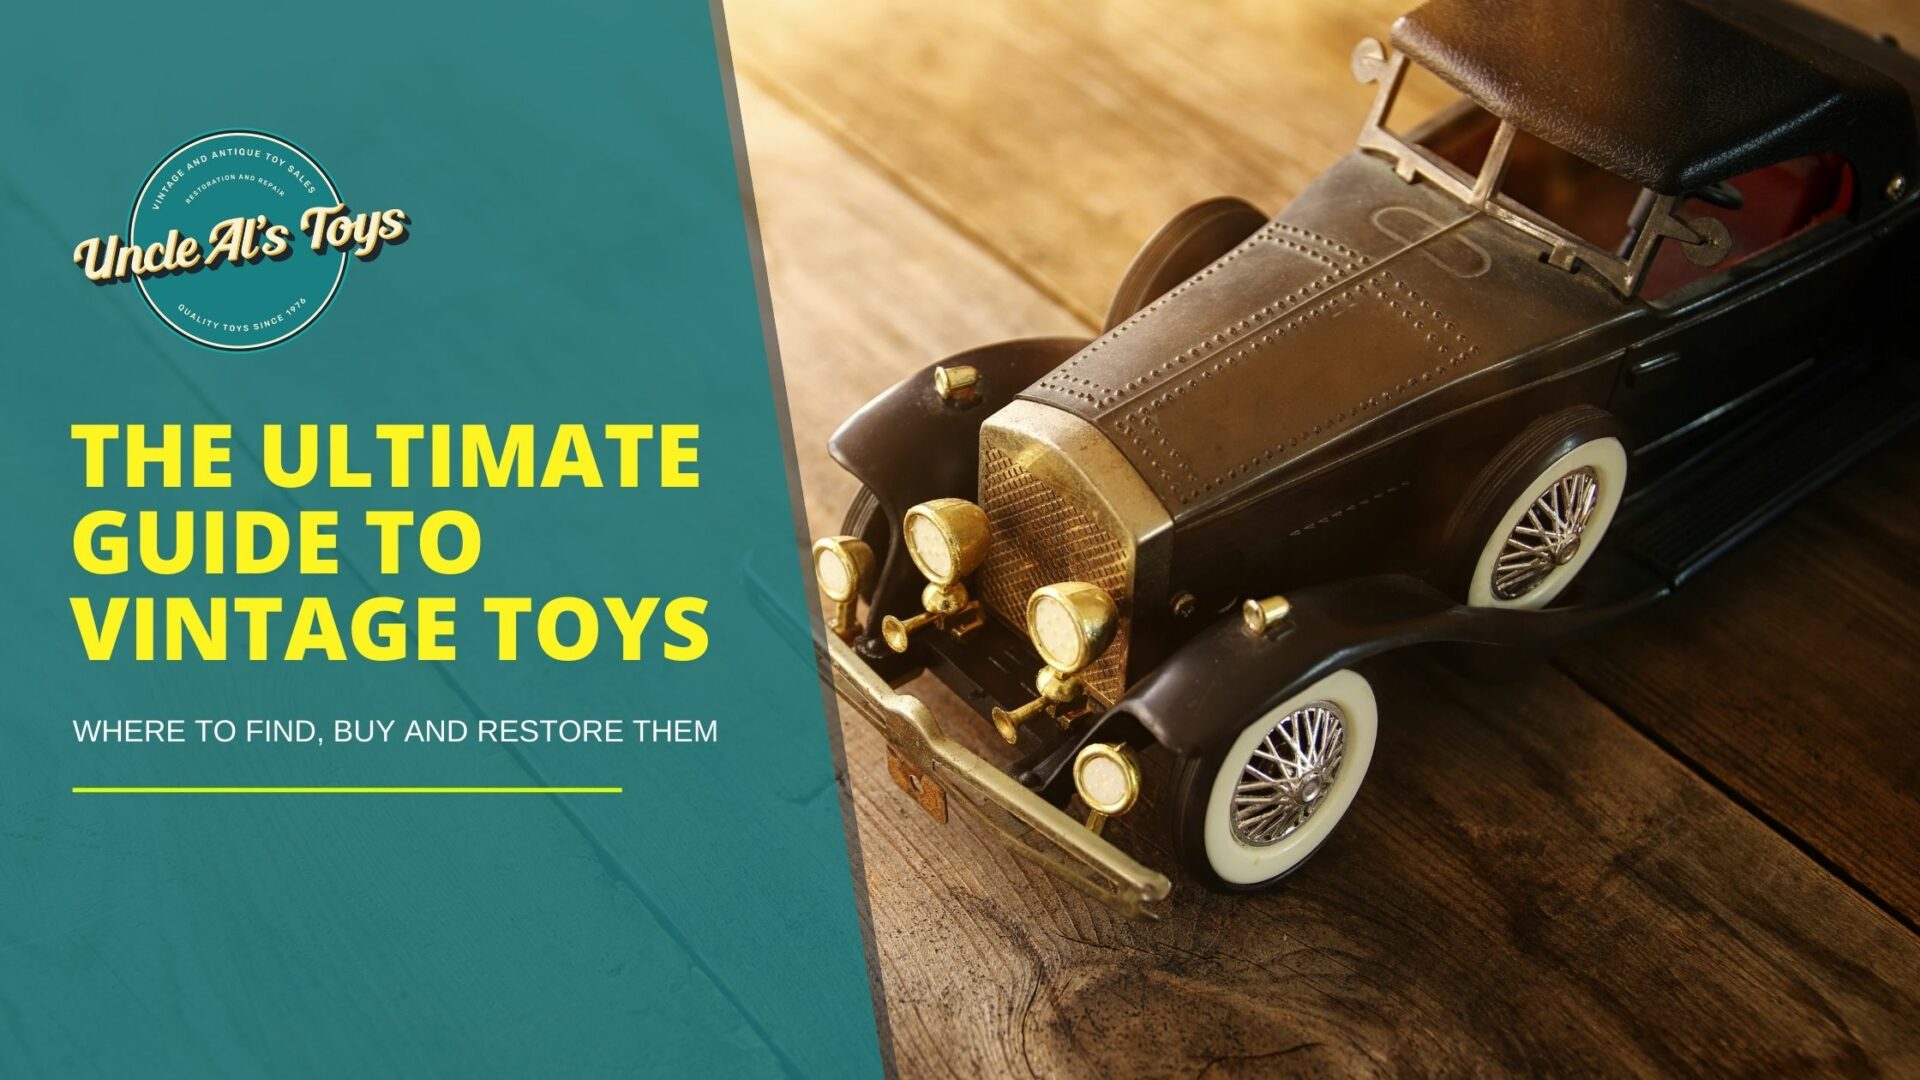 The Ultimate Guide to Vintage Toys - Where to Find Buy and Restore Them